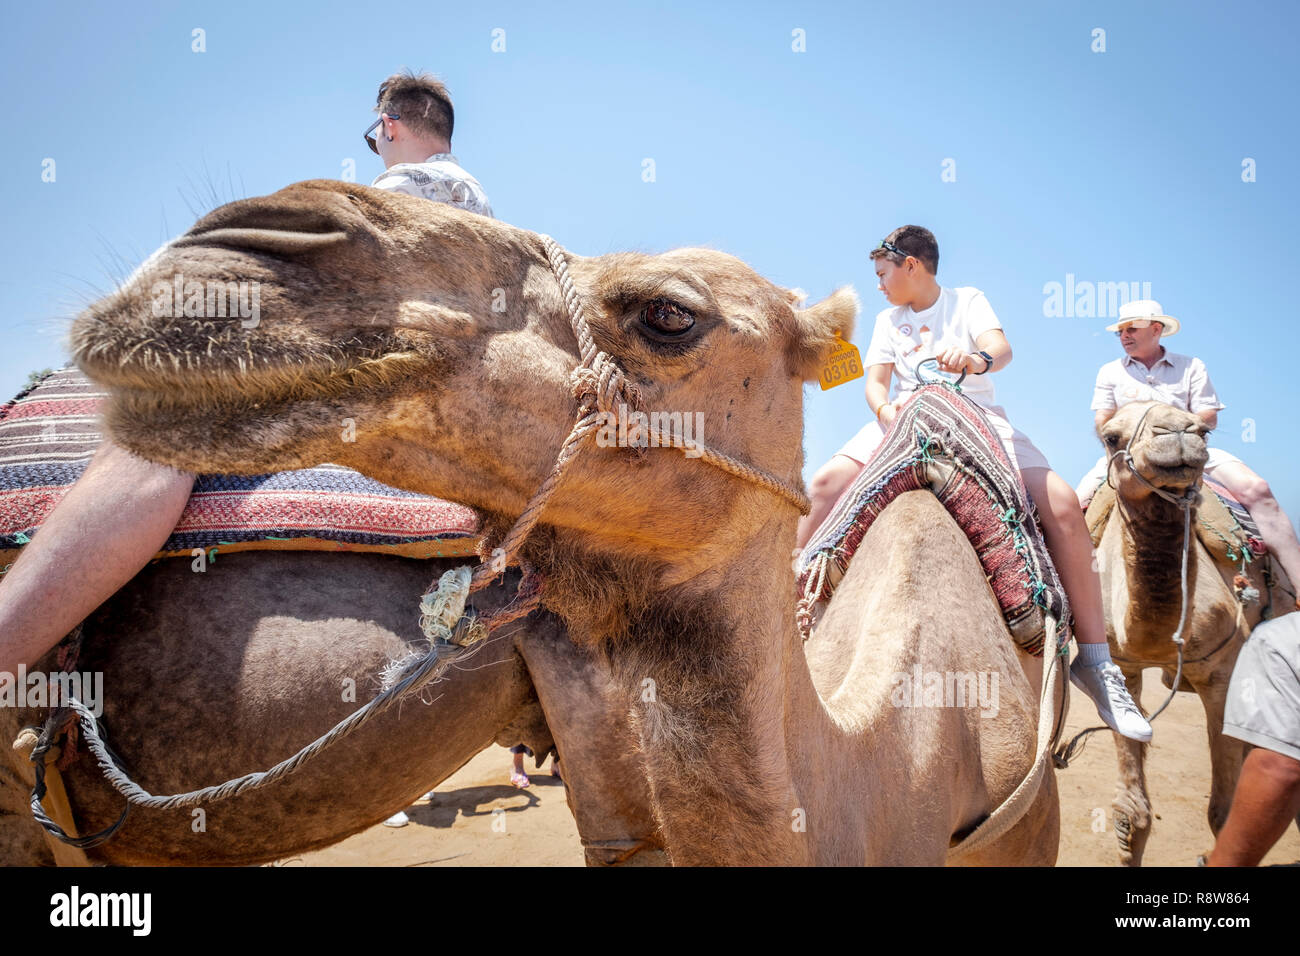 Camels under the summer sun in Tanger, Morocco. Stock Photo